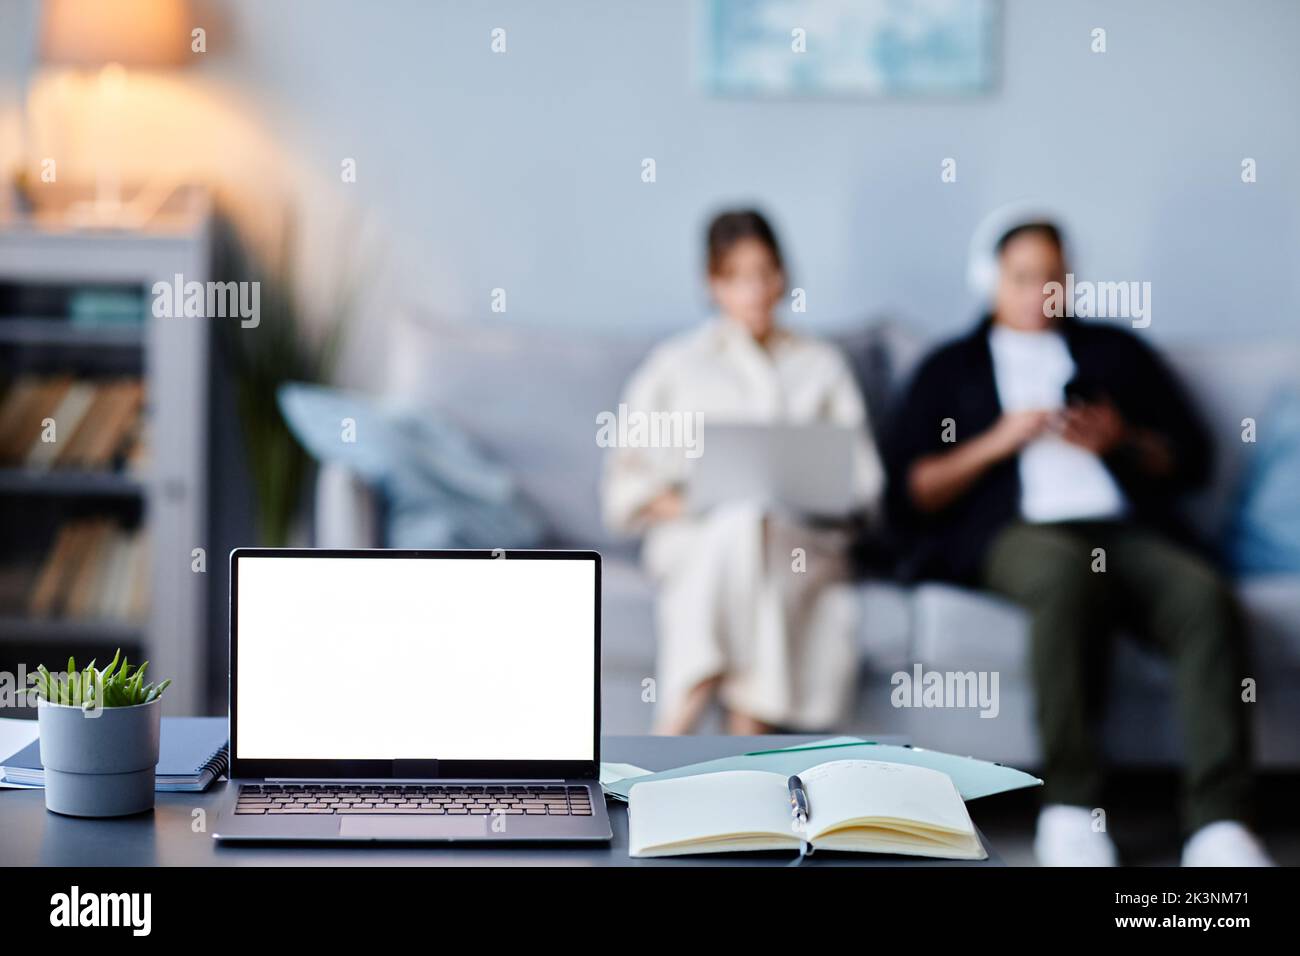 Background image of laptop with black white screen mockup in home interior with two women, copy space Stock Photo